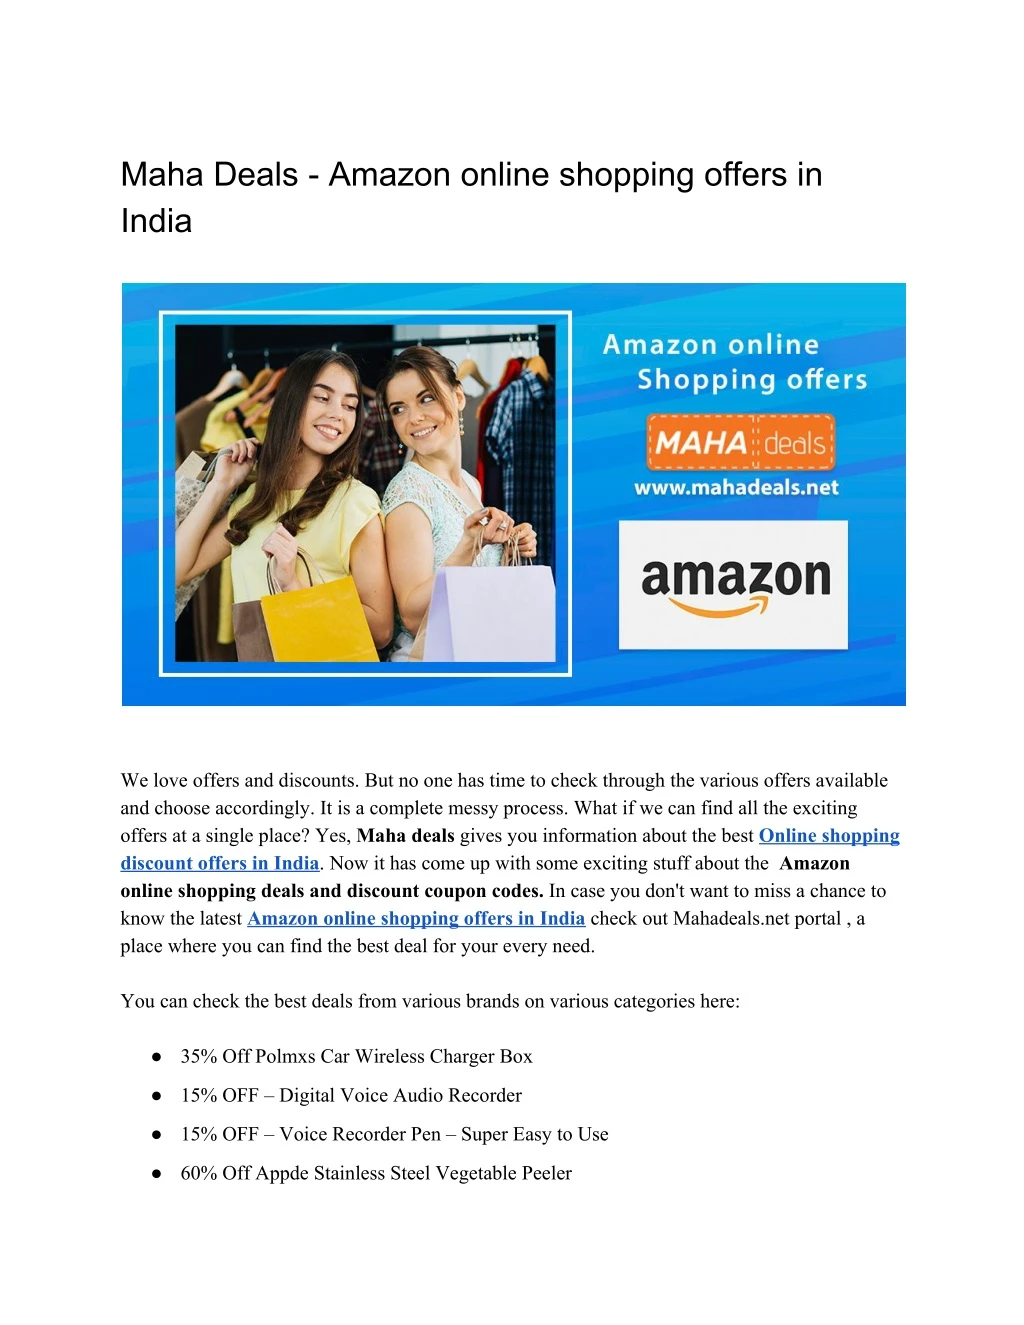 maha deals amazon online shopping offers in india